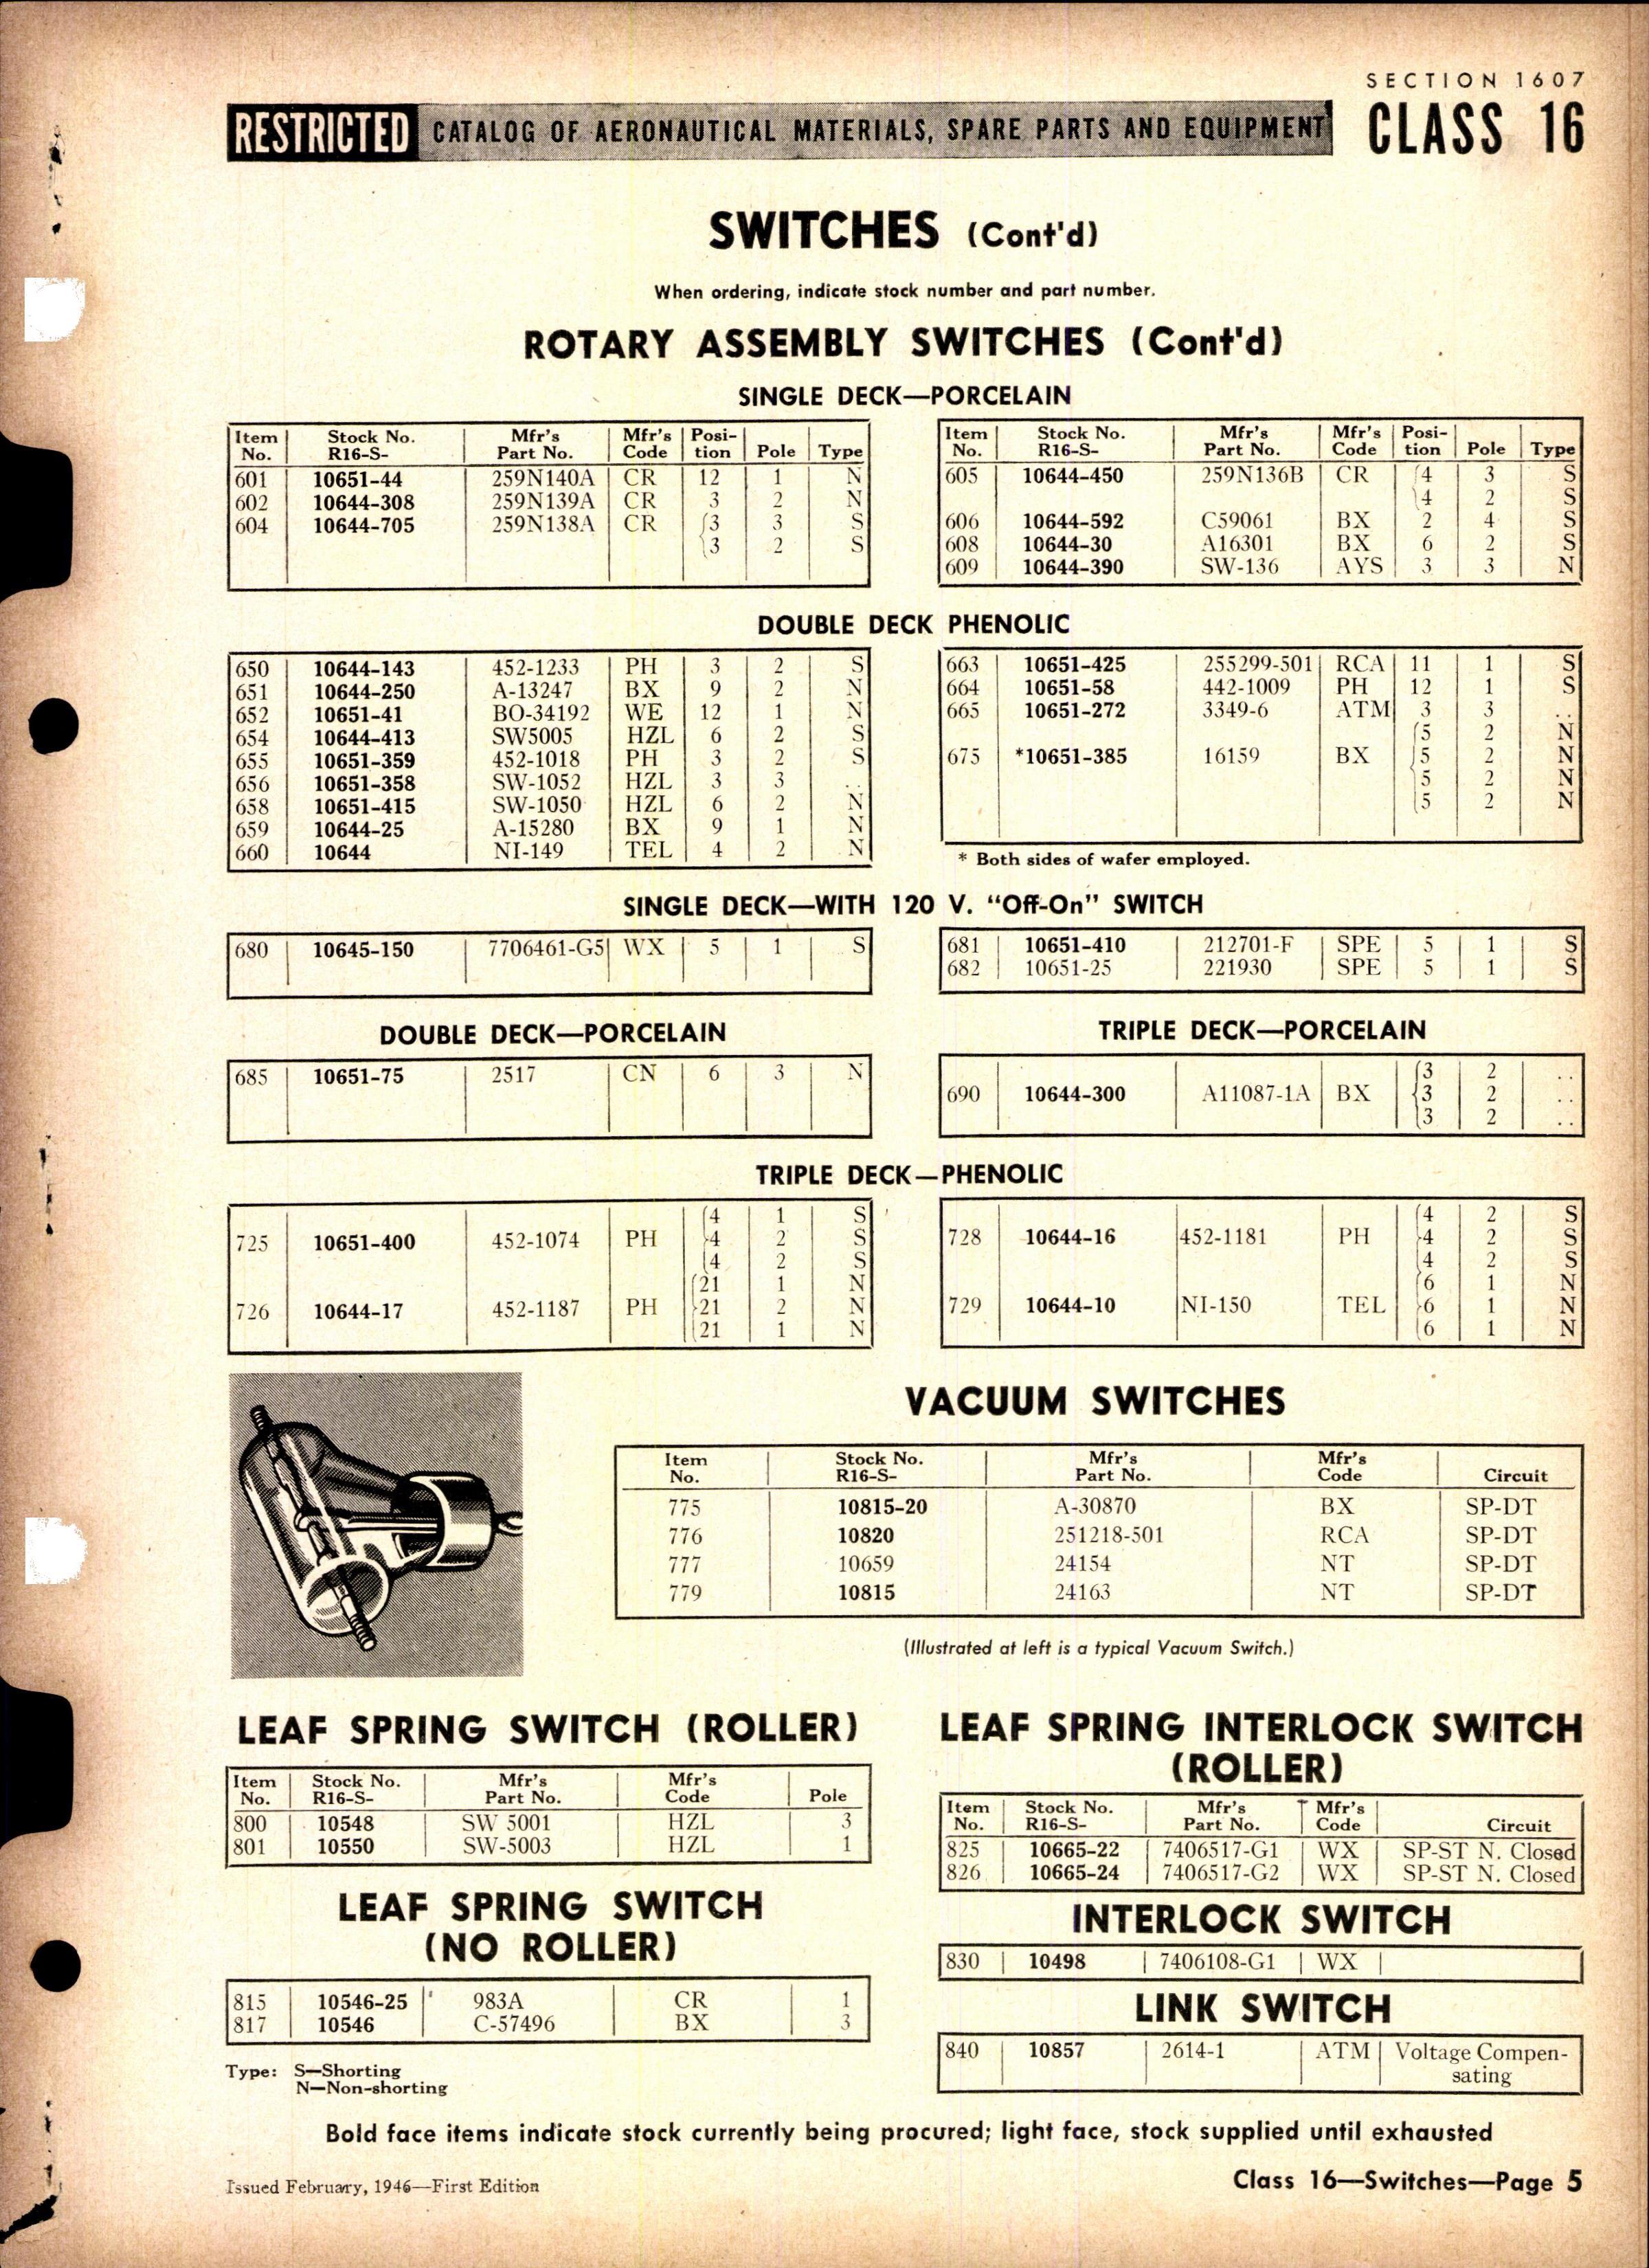 Sample page 5 from AirCorps Library document: Switches: Toggle, Rotary, Vacuum, Leaf Spring, Interlock, Link